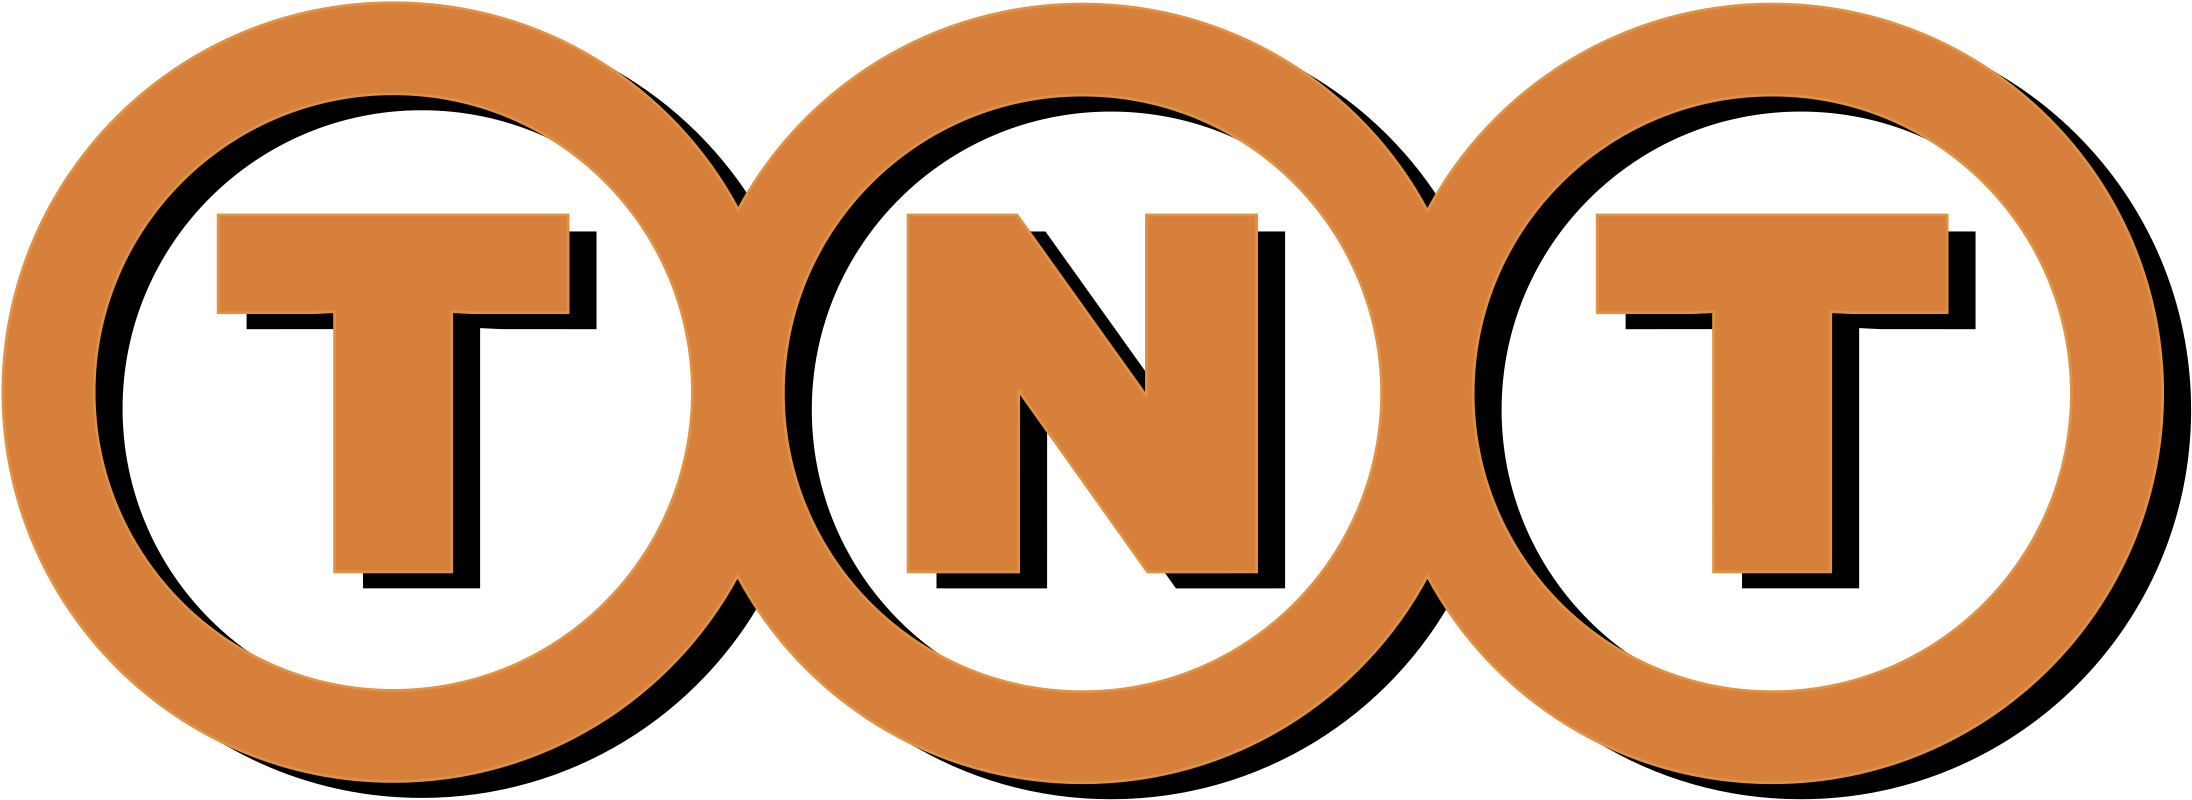 Tnt Logo Png Transparent - Express Delivery International, Fast Shipping, Express (2400x2400), Png Download